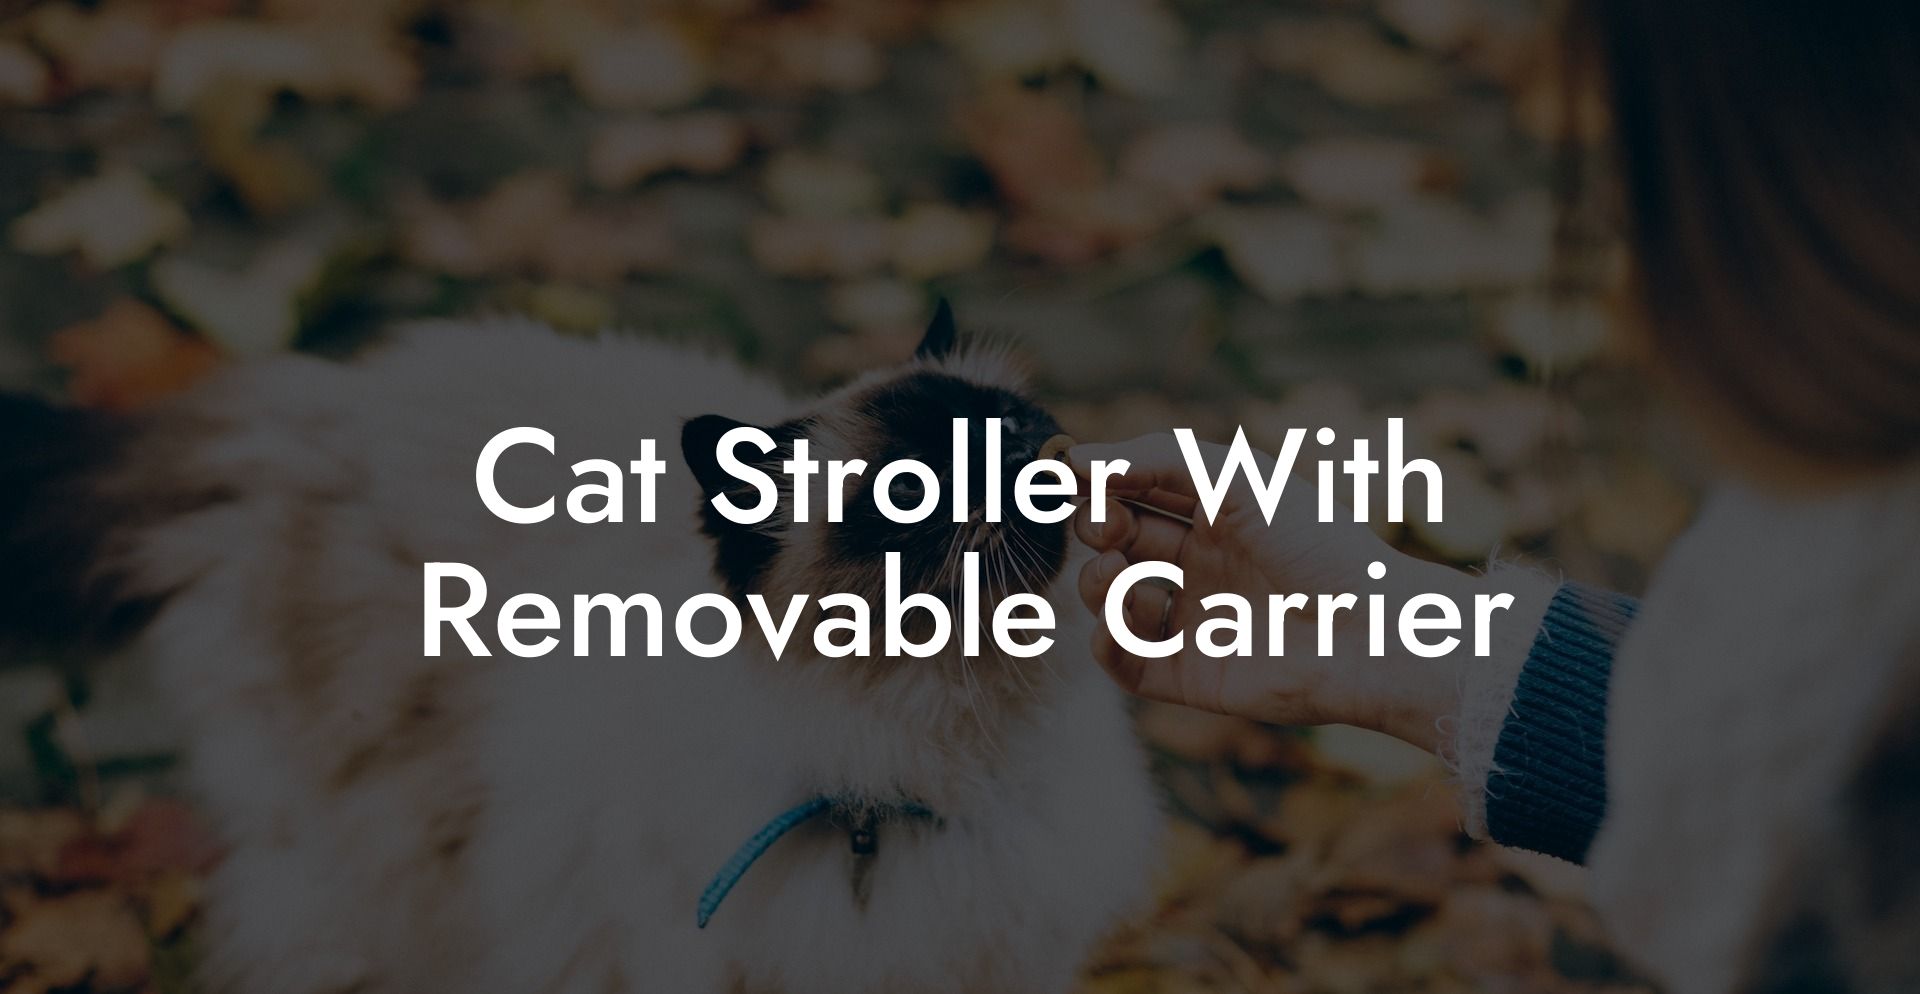 Cat Stroller With Removable Carrier